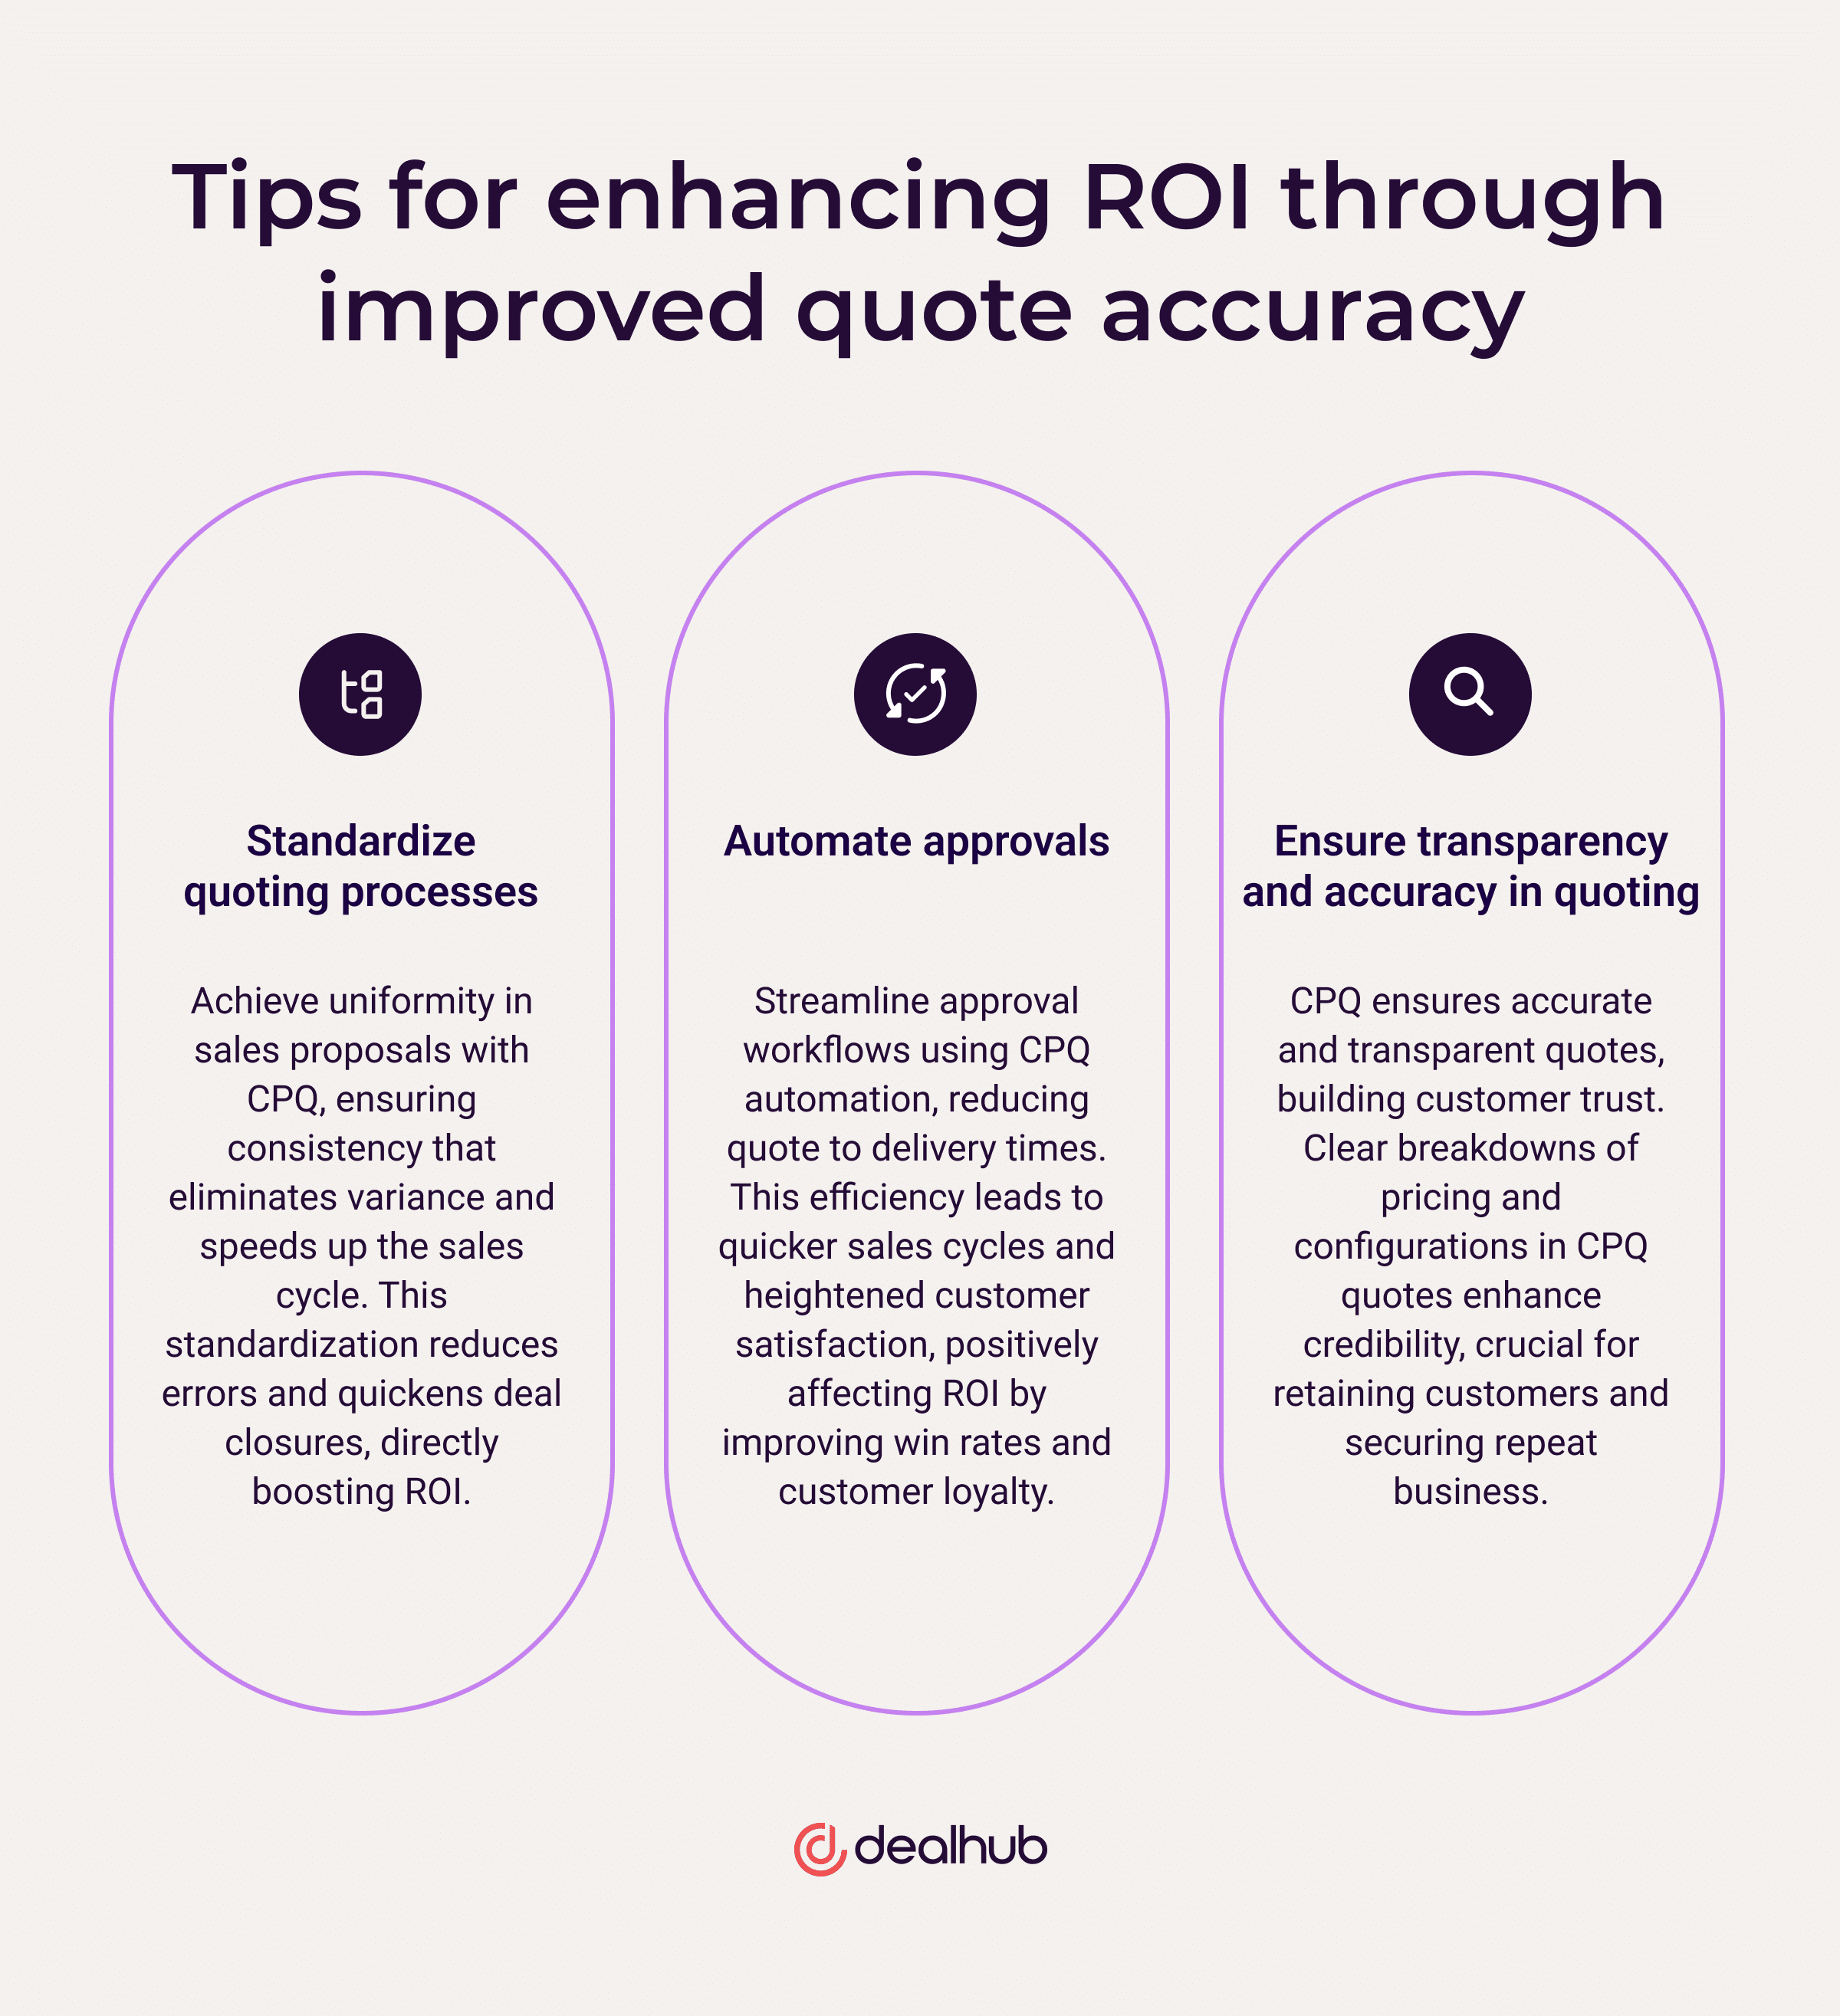 Tips for enhancing ROI through improved quote accuracy